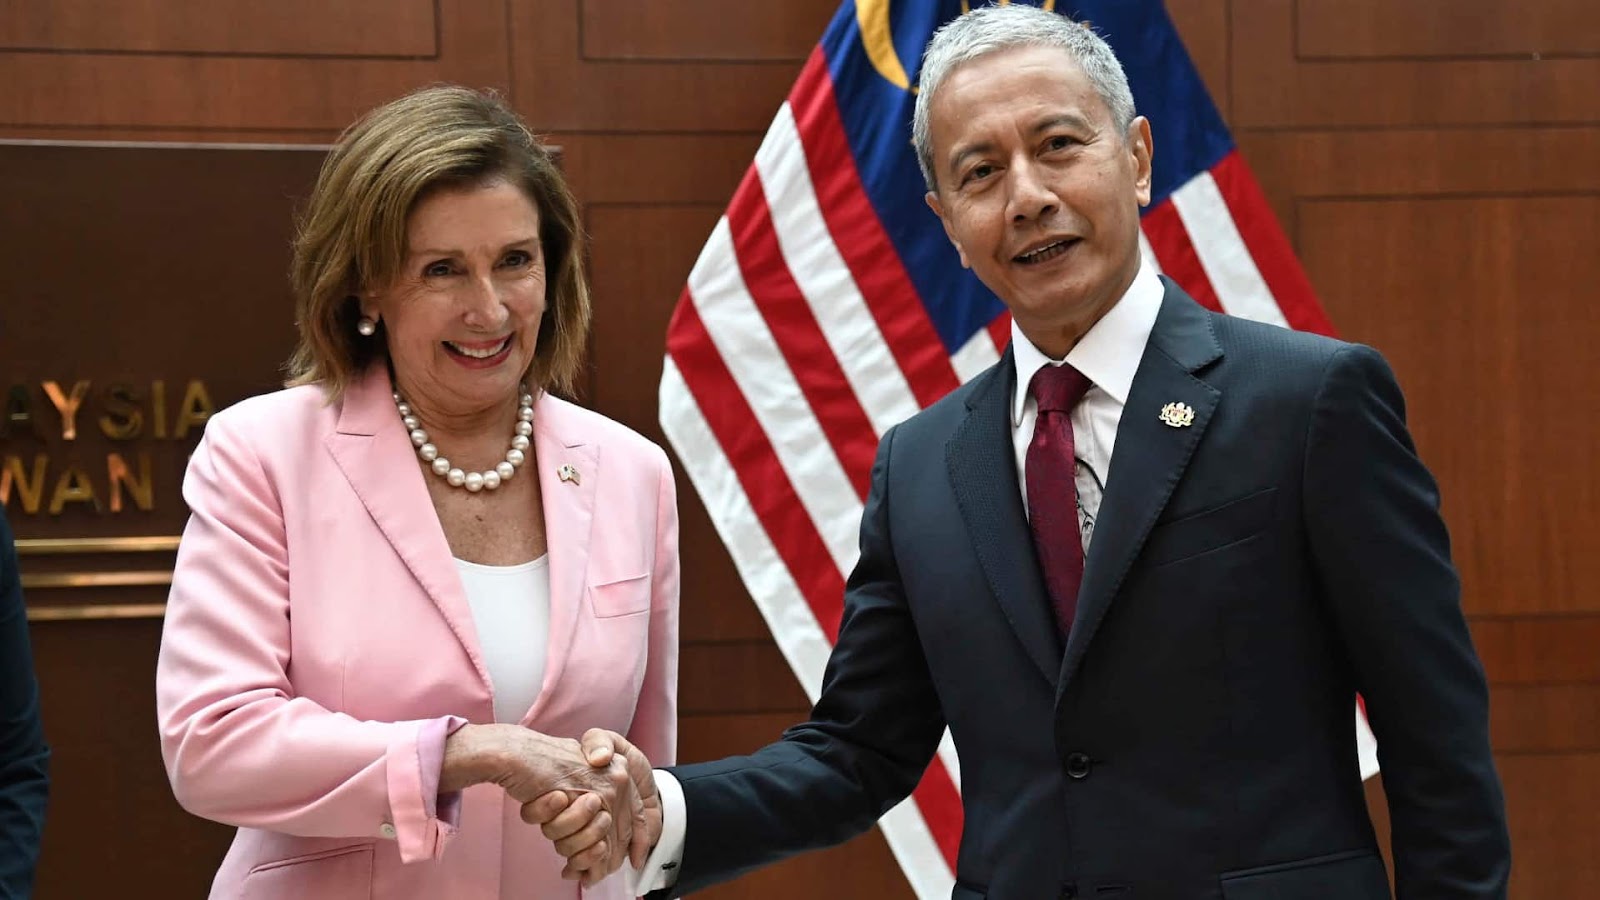 U.S. Speaker Nancy Pelosi arrives in Taiwan for official visit heavily  criticized by China | CBC News